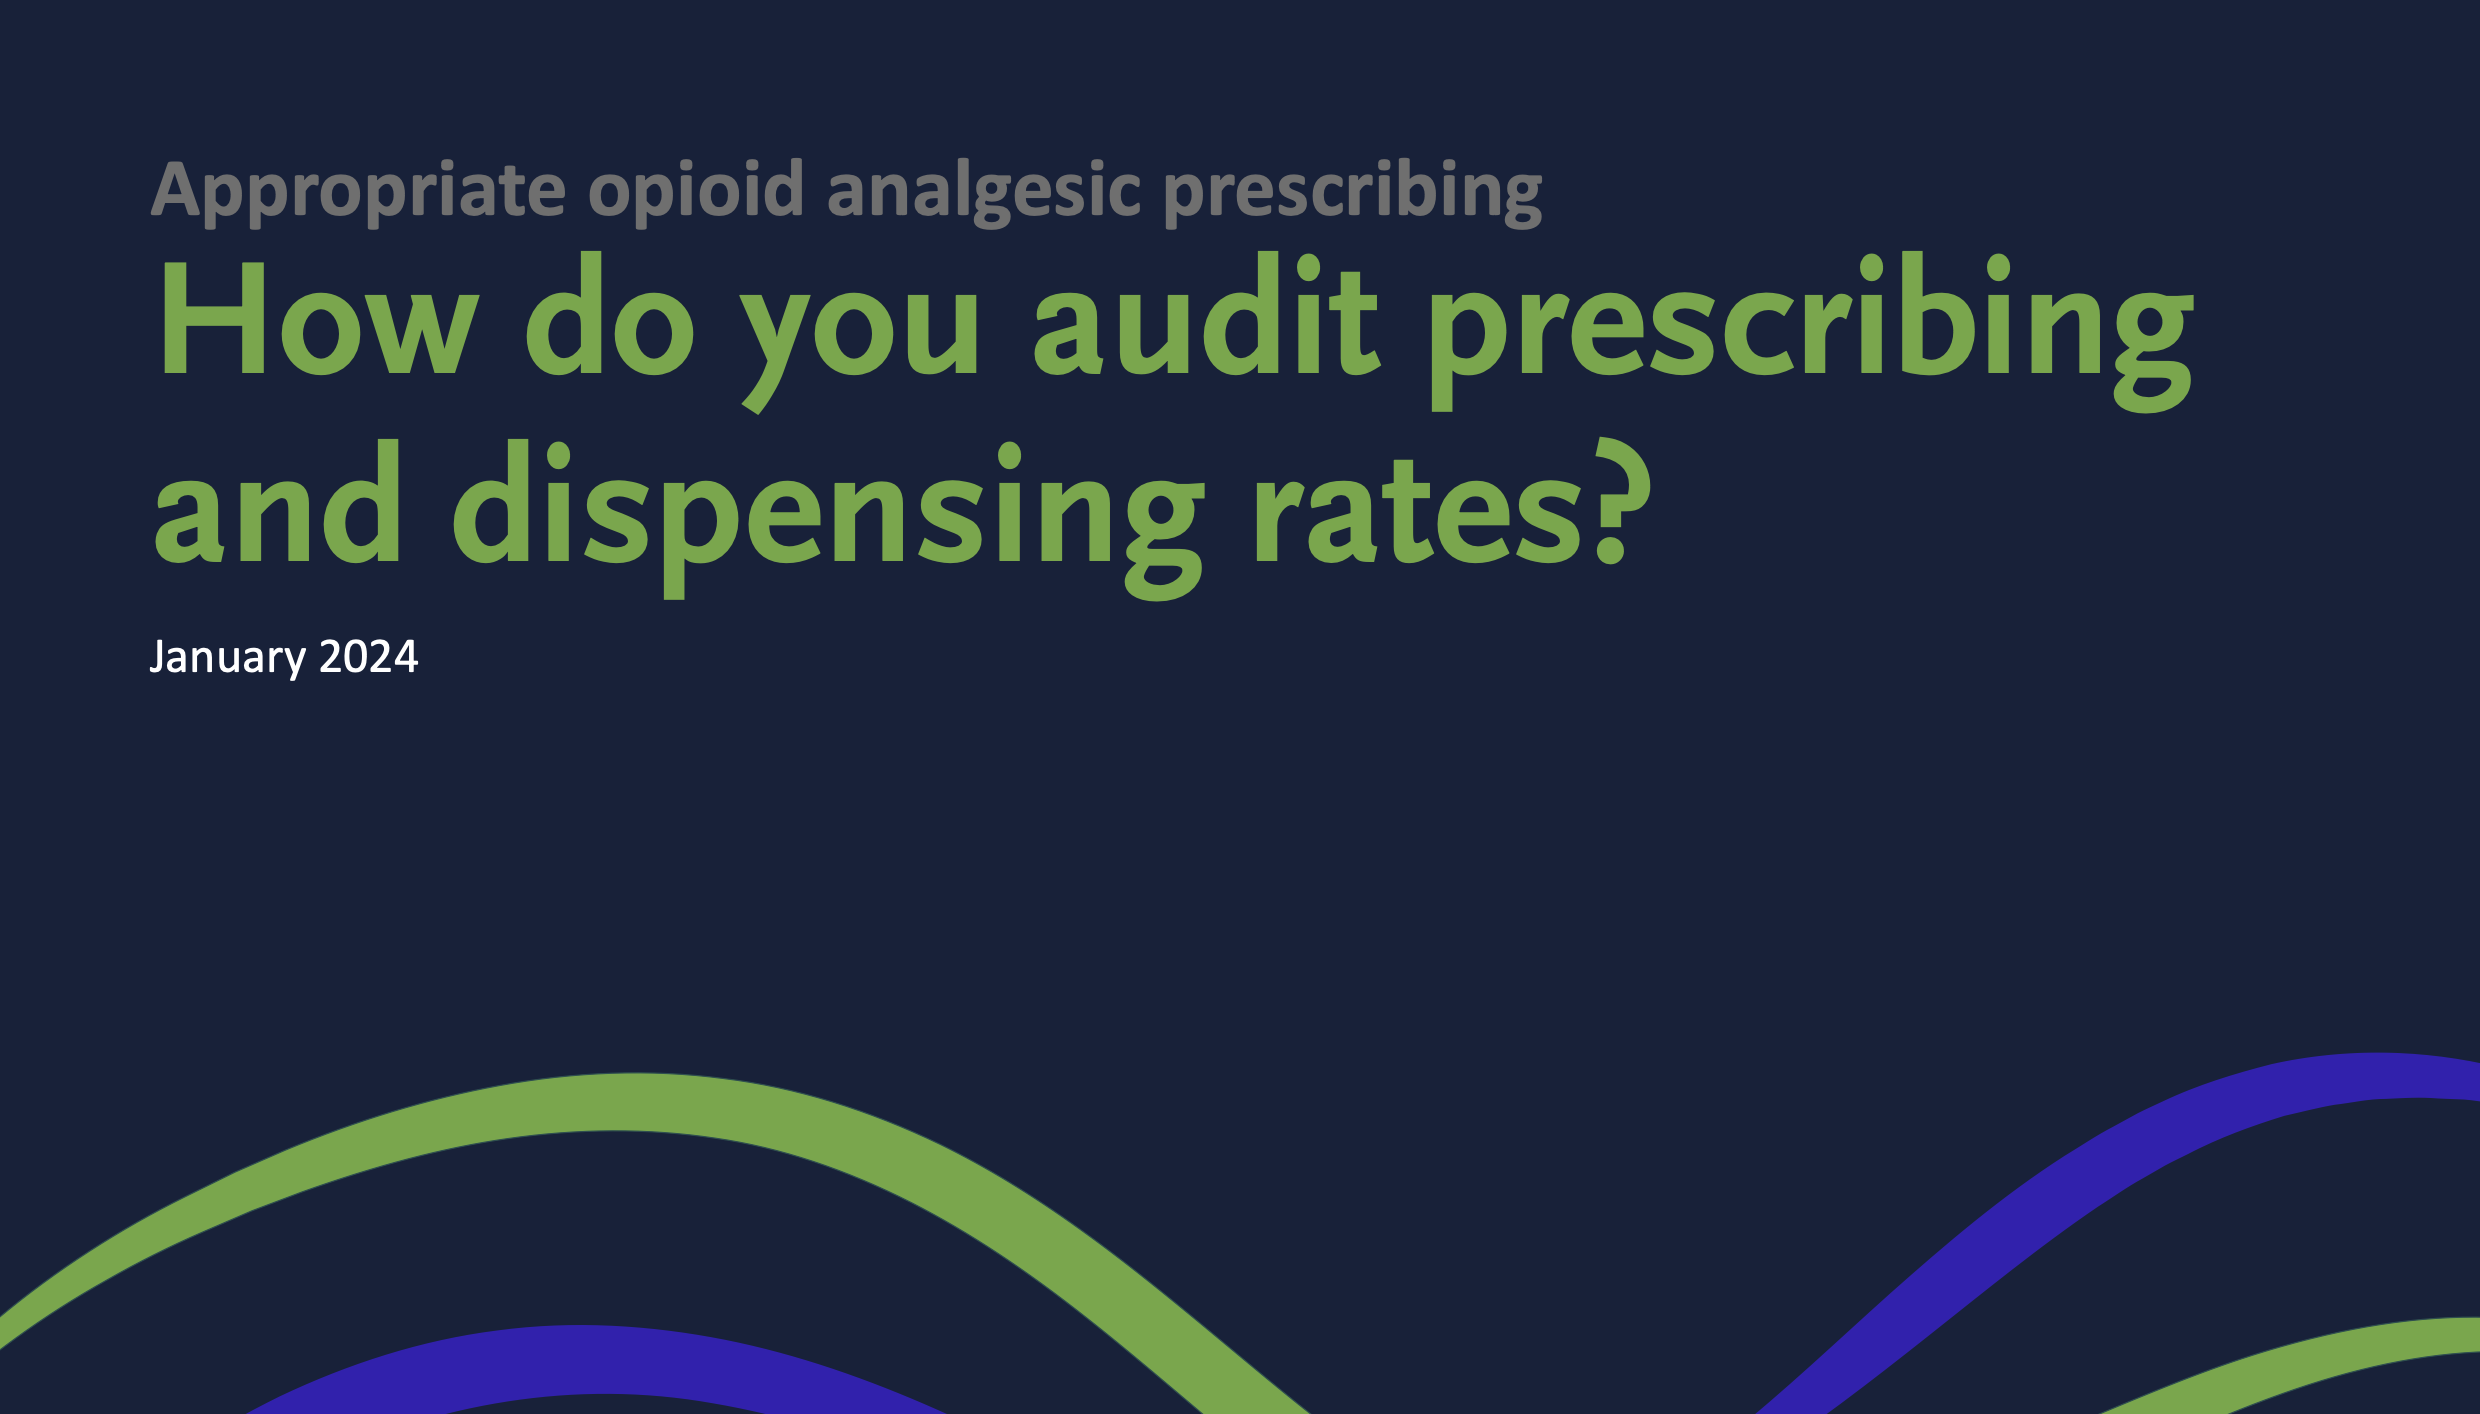 How do you audit prescribing and dispensing rates?